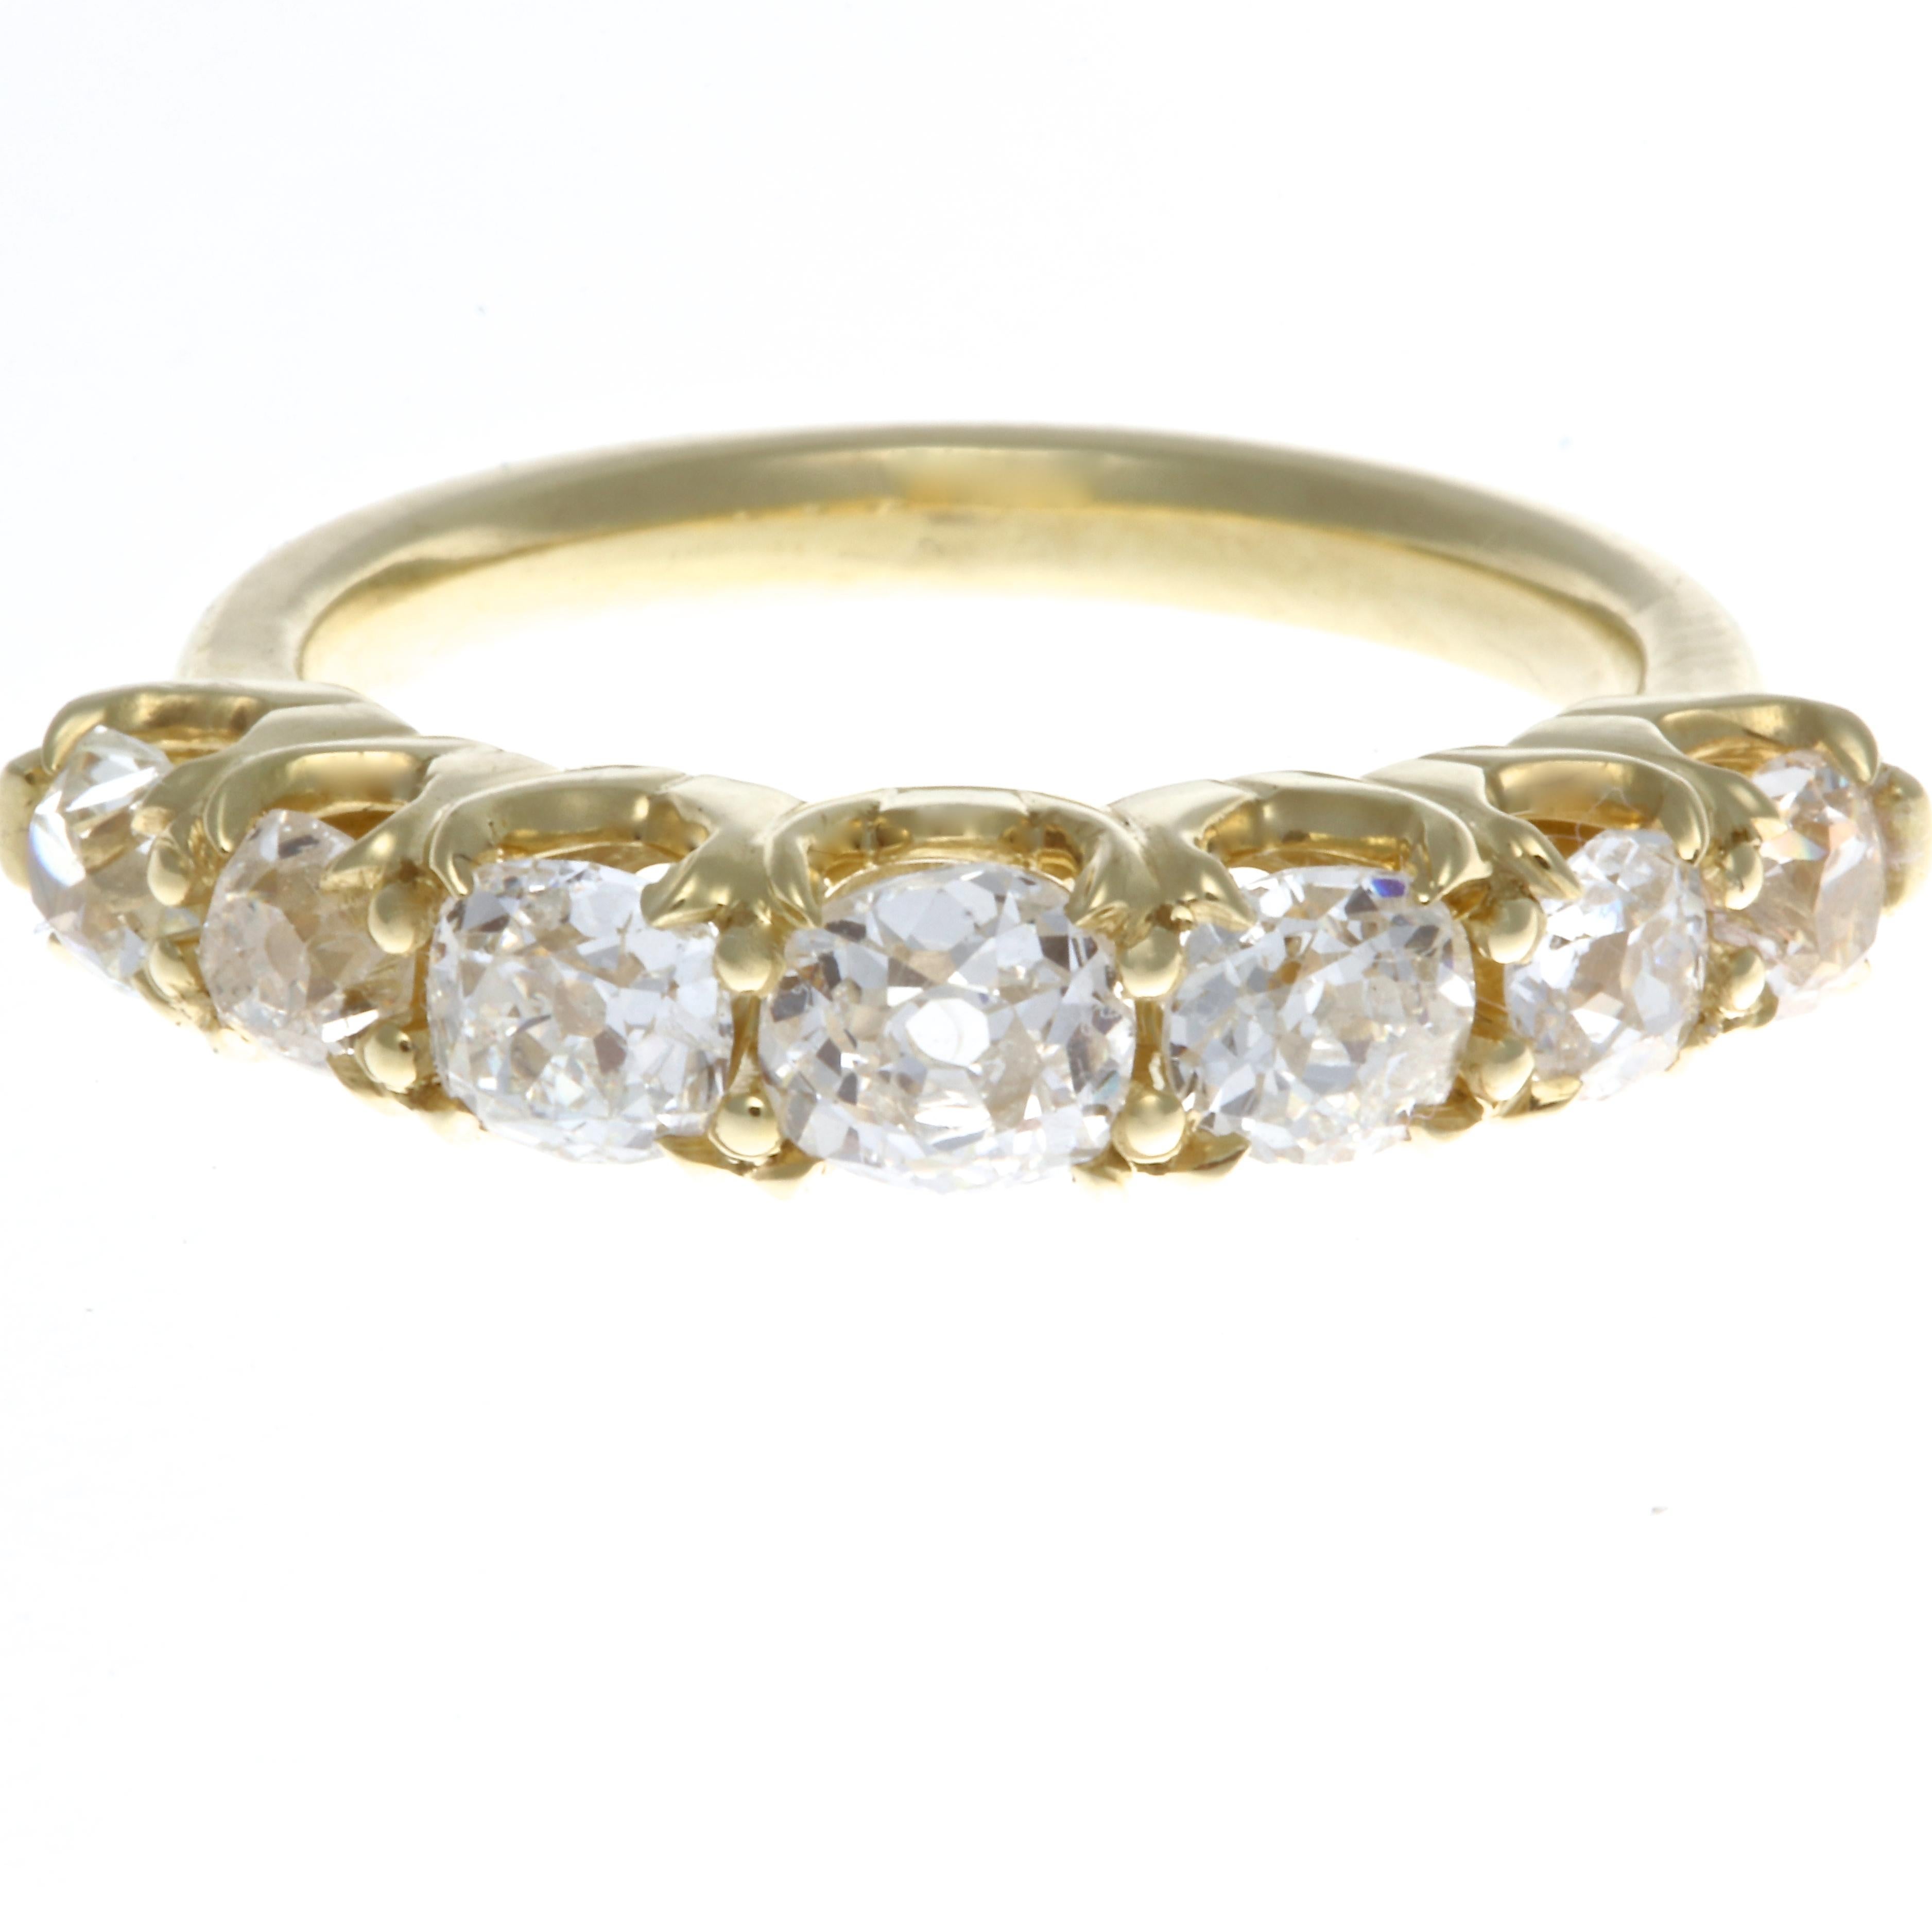 Where Modern meets Victorian. An original creation featuring a striking combination of 18k yellow gold and 7 white diamonds. This ring will be a great addition to your collection and is a timeless piece that can be worn solo any time or stacked with